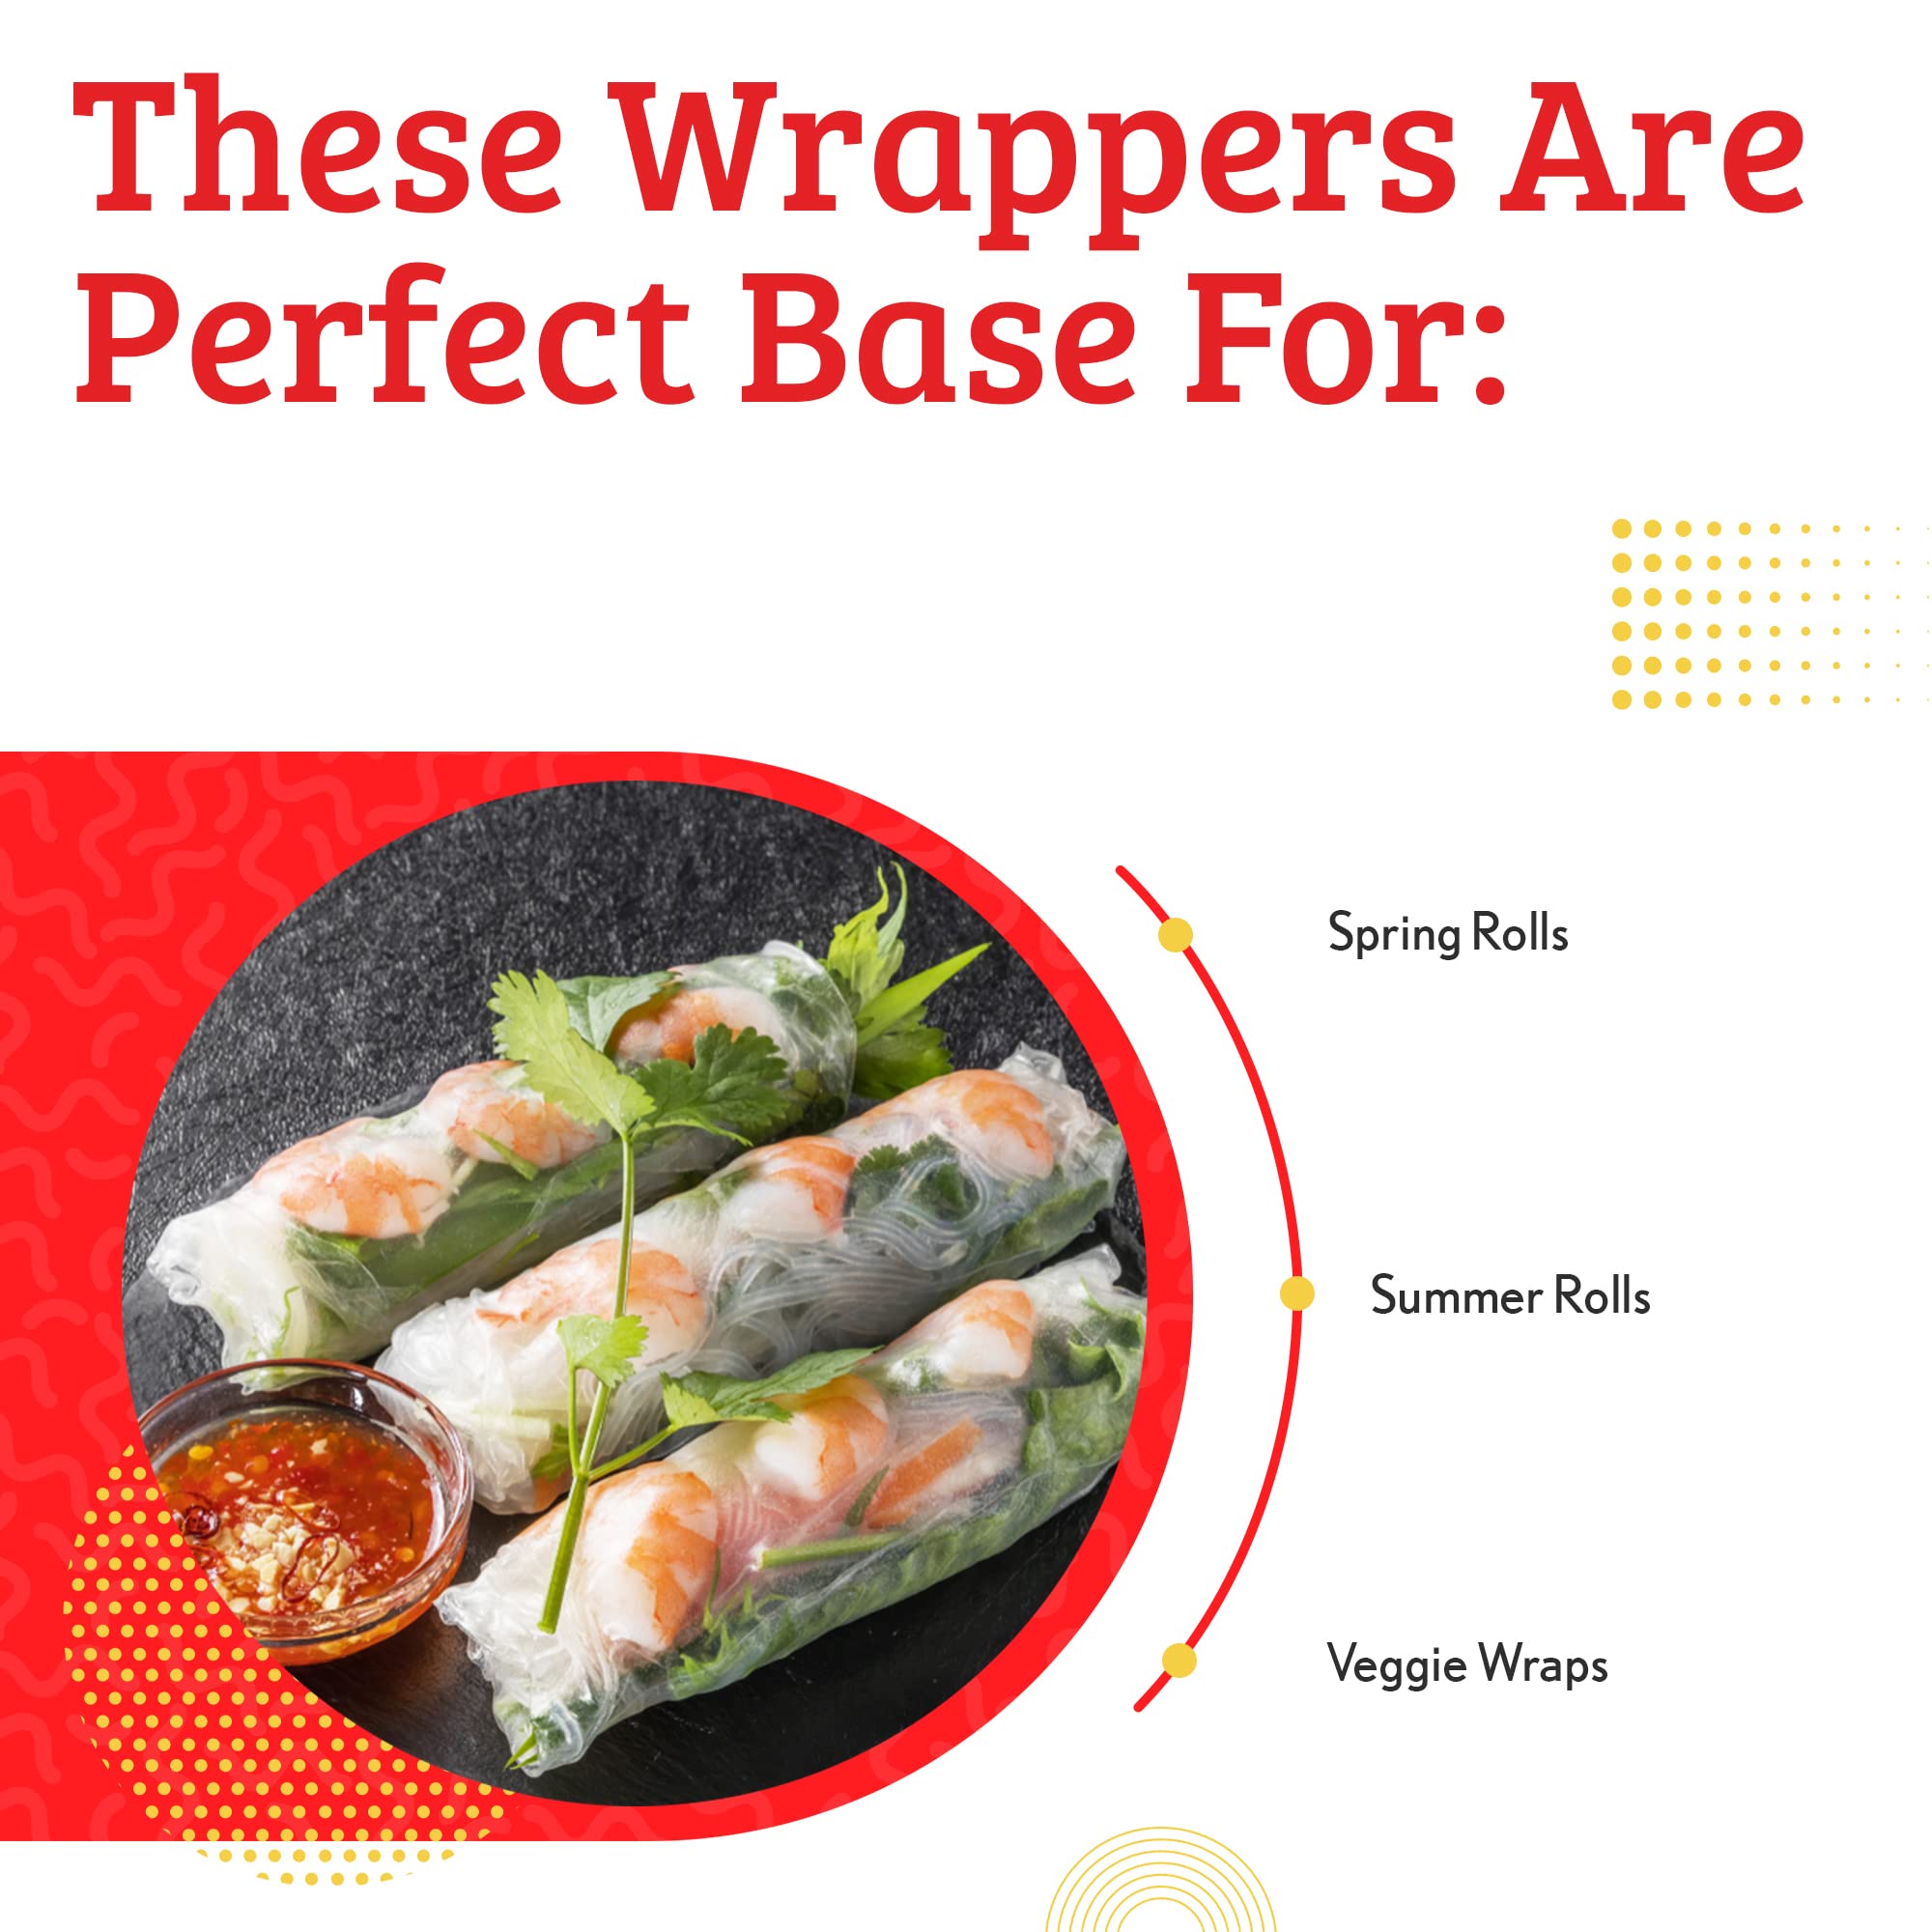 Cathay Fresh Spring Roll Rice Paper Wrappers, Rice Paper Wrappers for Fresh Rolls-30 Sheets, Non-GMO, Gluten-Free, Low Carb, Vietnamese Summer Wrap with Natural Ingredients, Veggie Wrap (Round, 22cm)